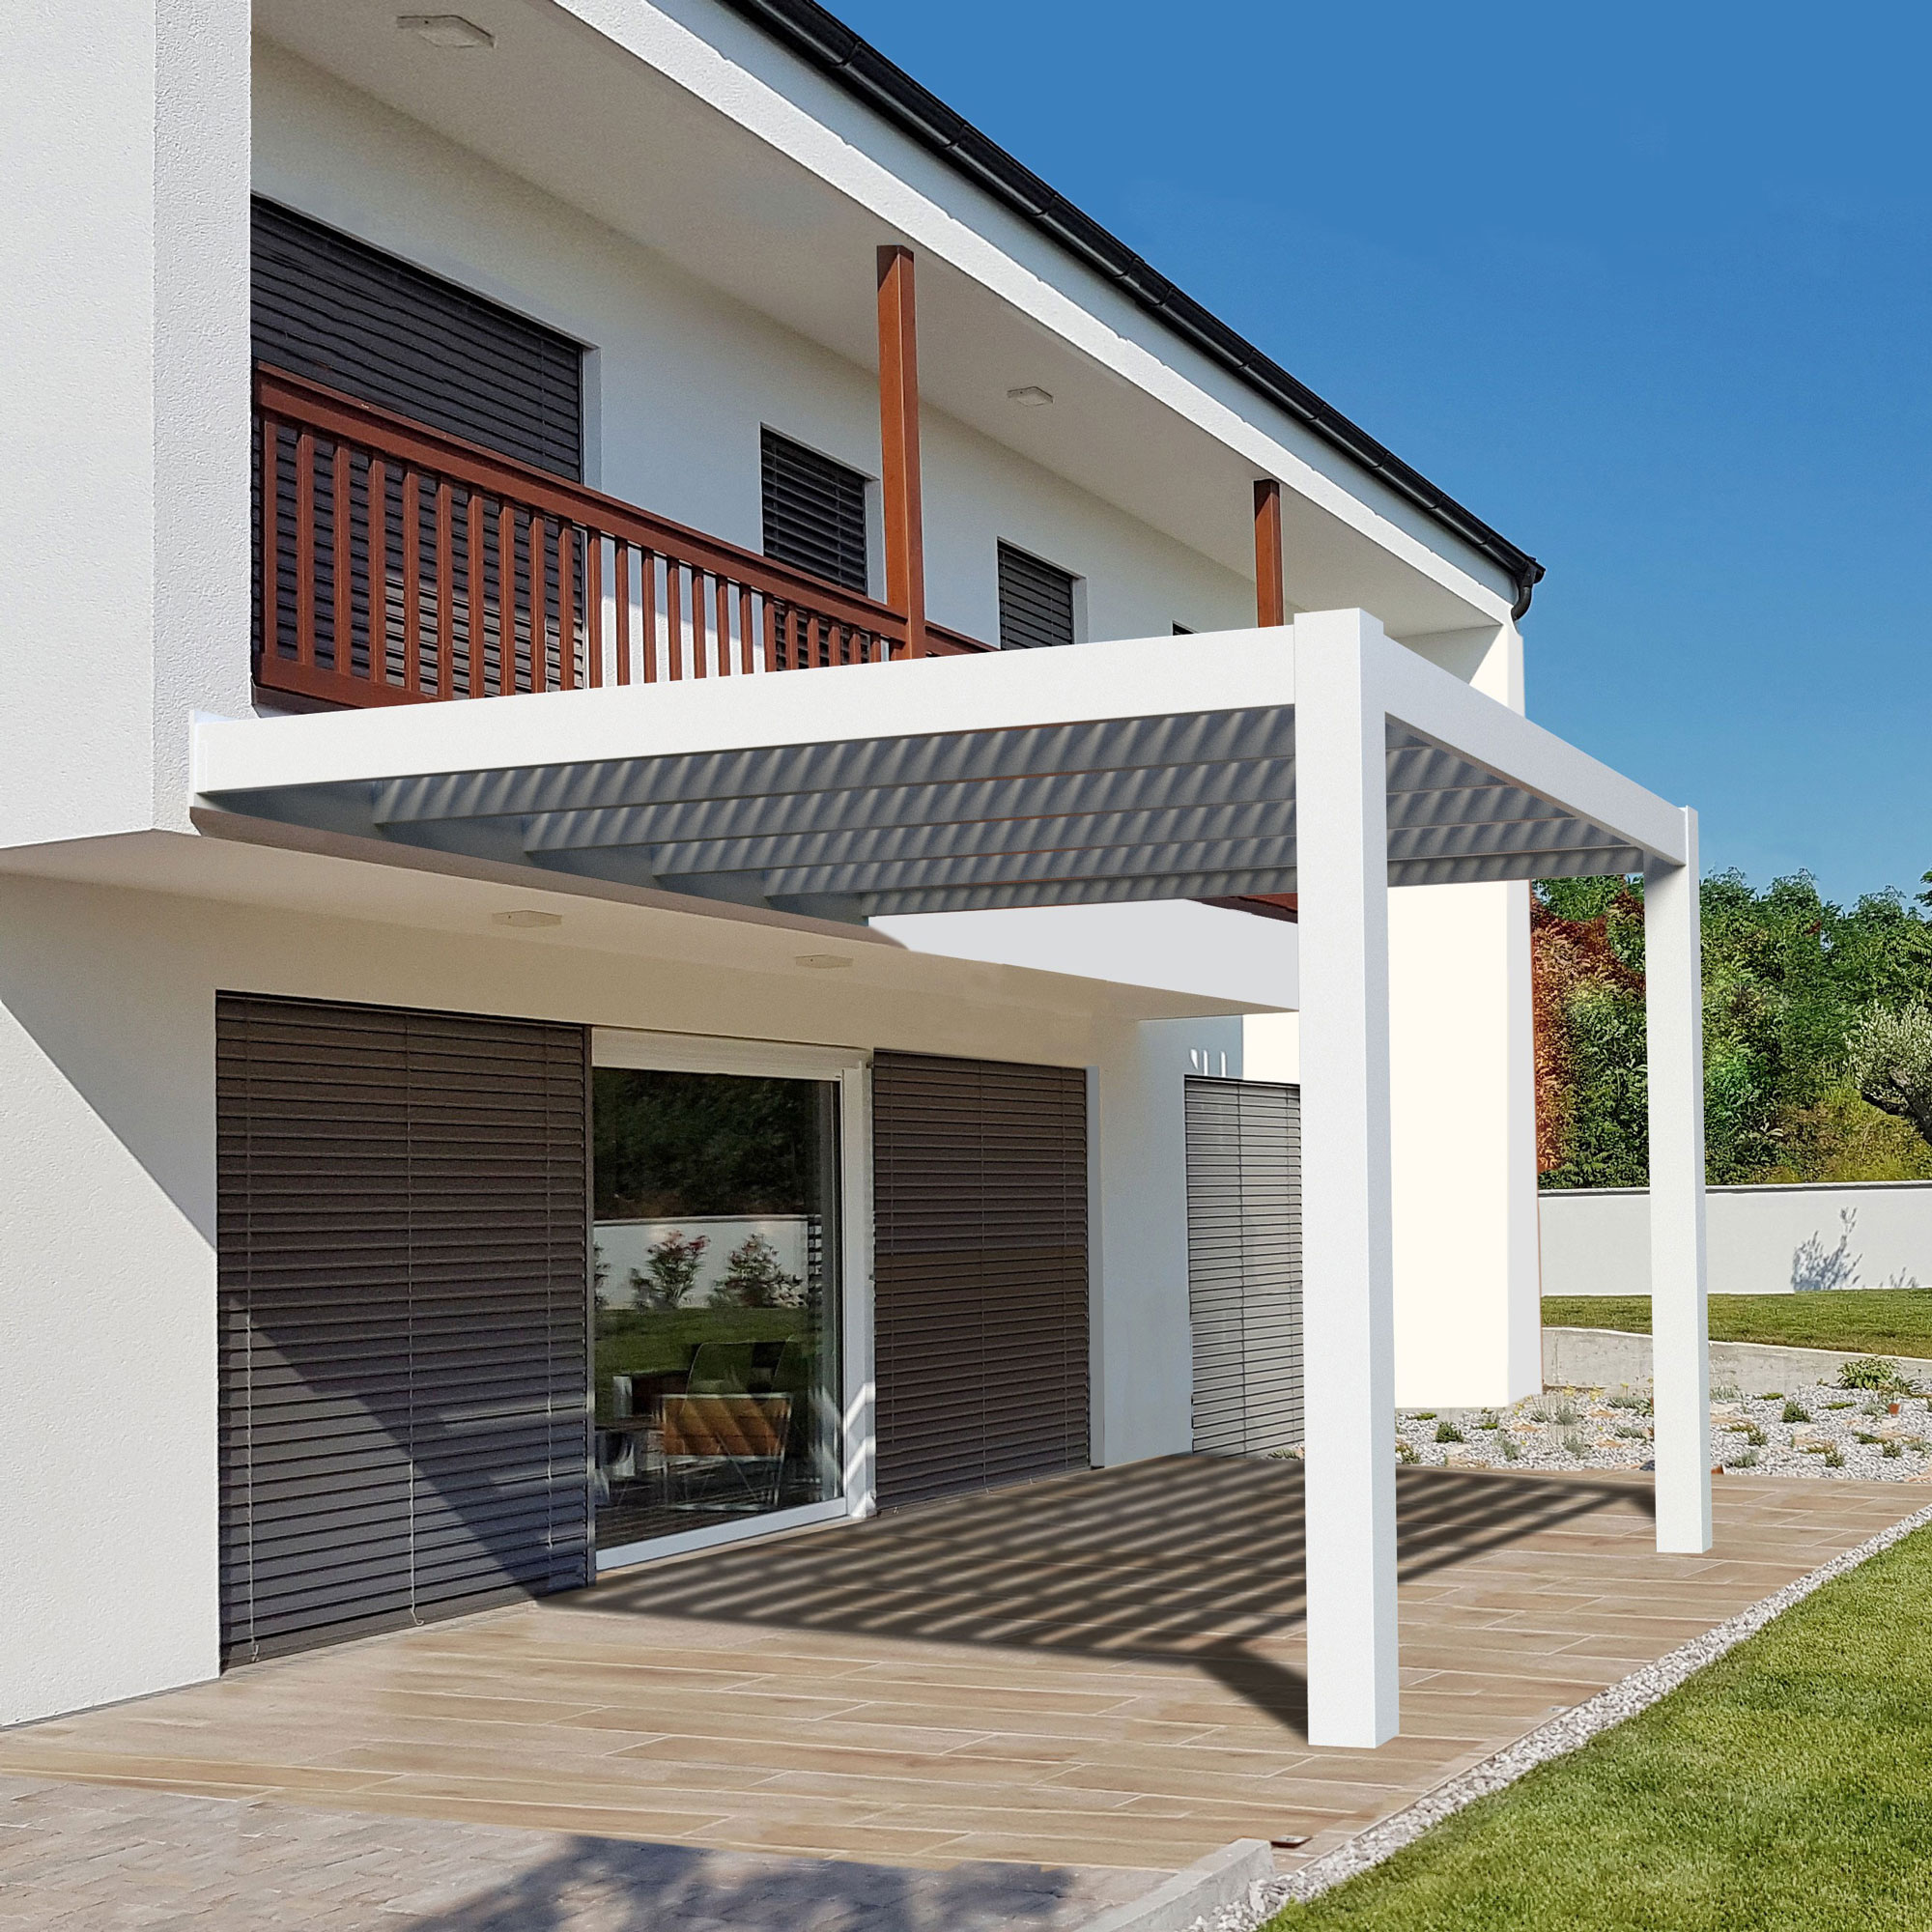 This attached modern pergola offers shade to an attached patio. 